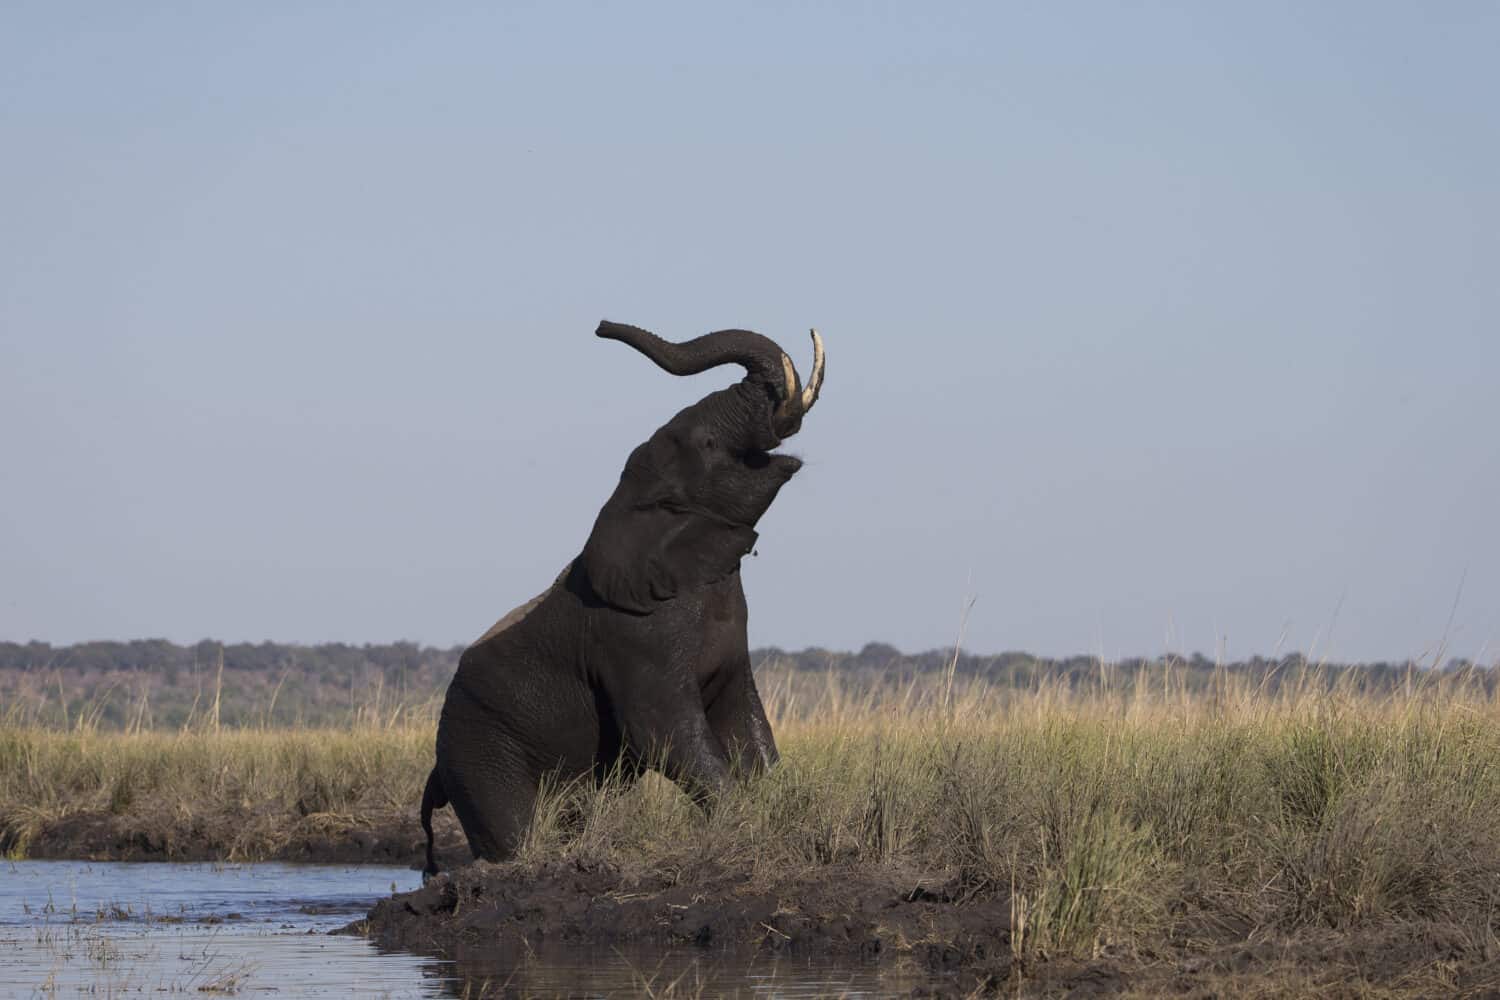 Elephant trumpeting as he leaves the Chobe River in Botswana Africa